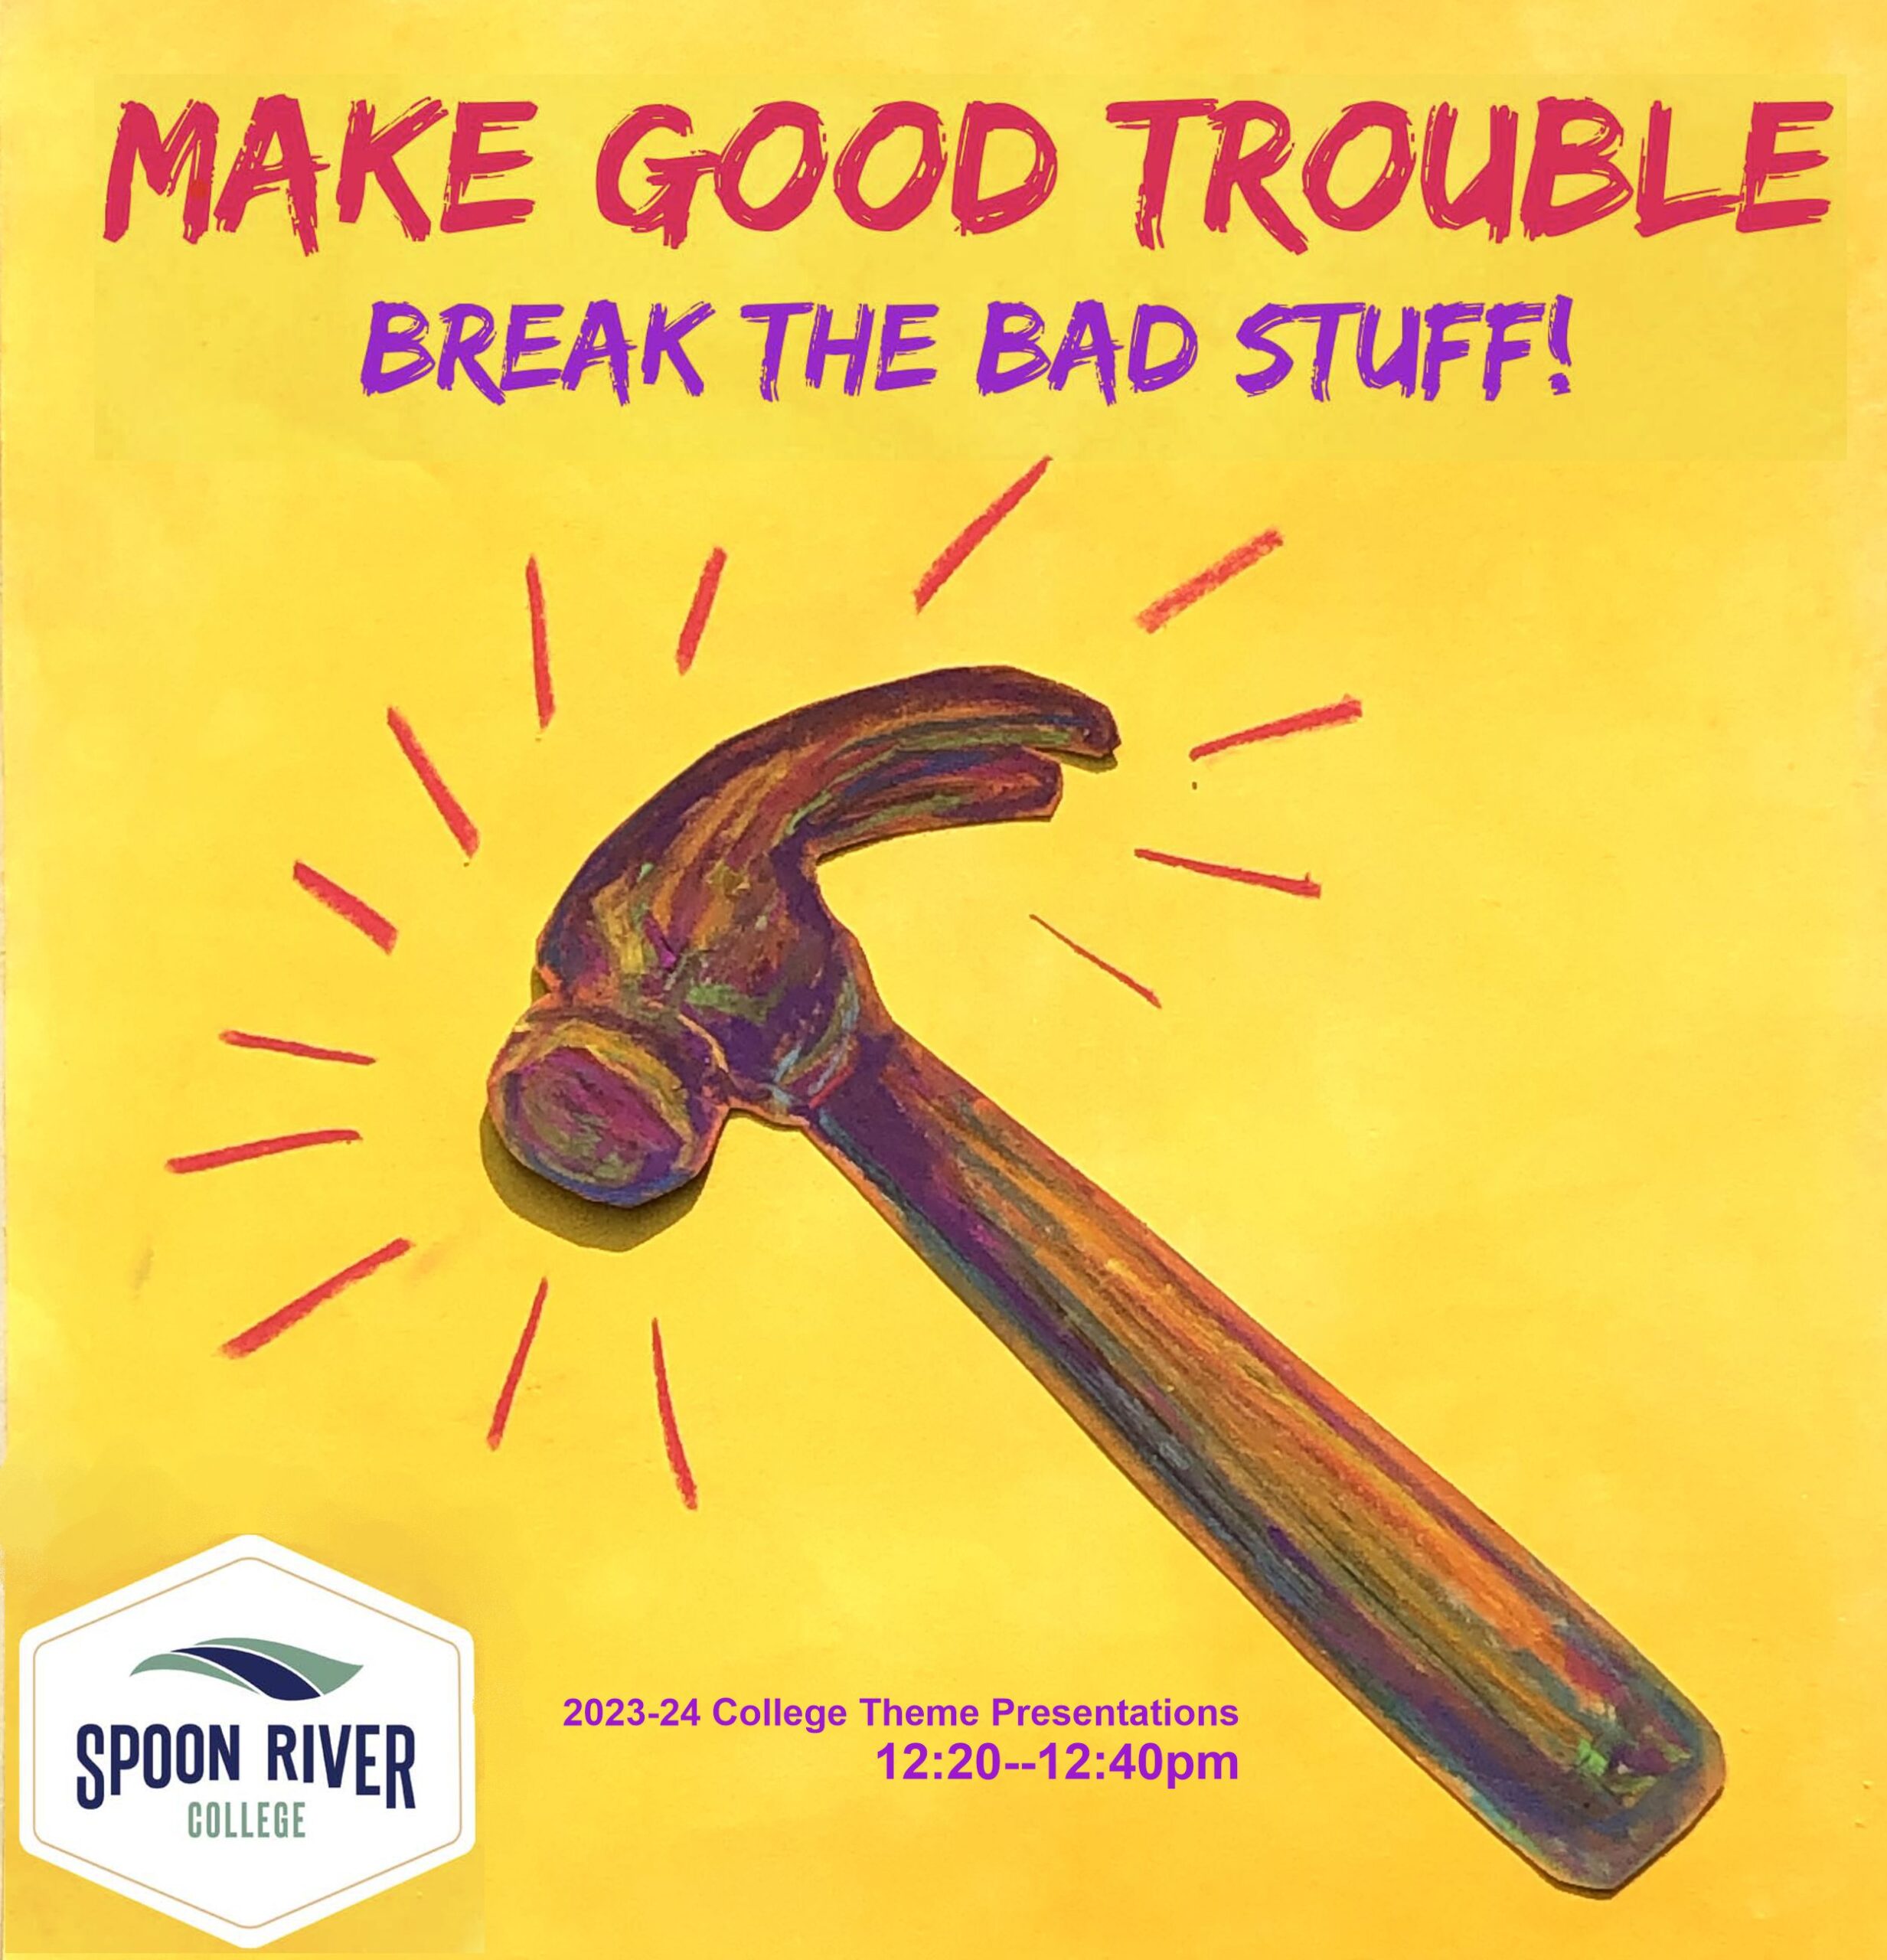 Make Good Trouble - Break the Bad Stuff with cartoon image of hammer striking on a yellow background, also SRC logo and College Theme Presentations - 12:20 to 12:40pm